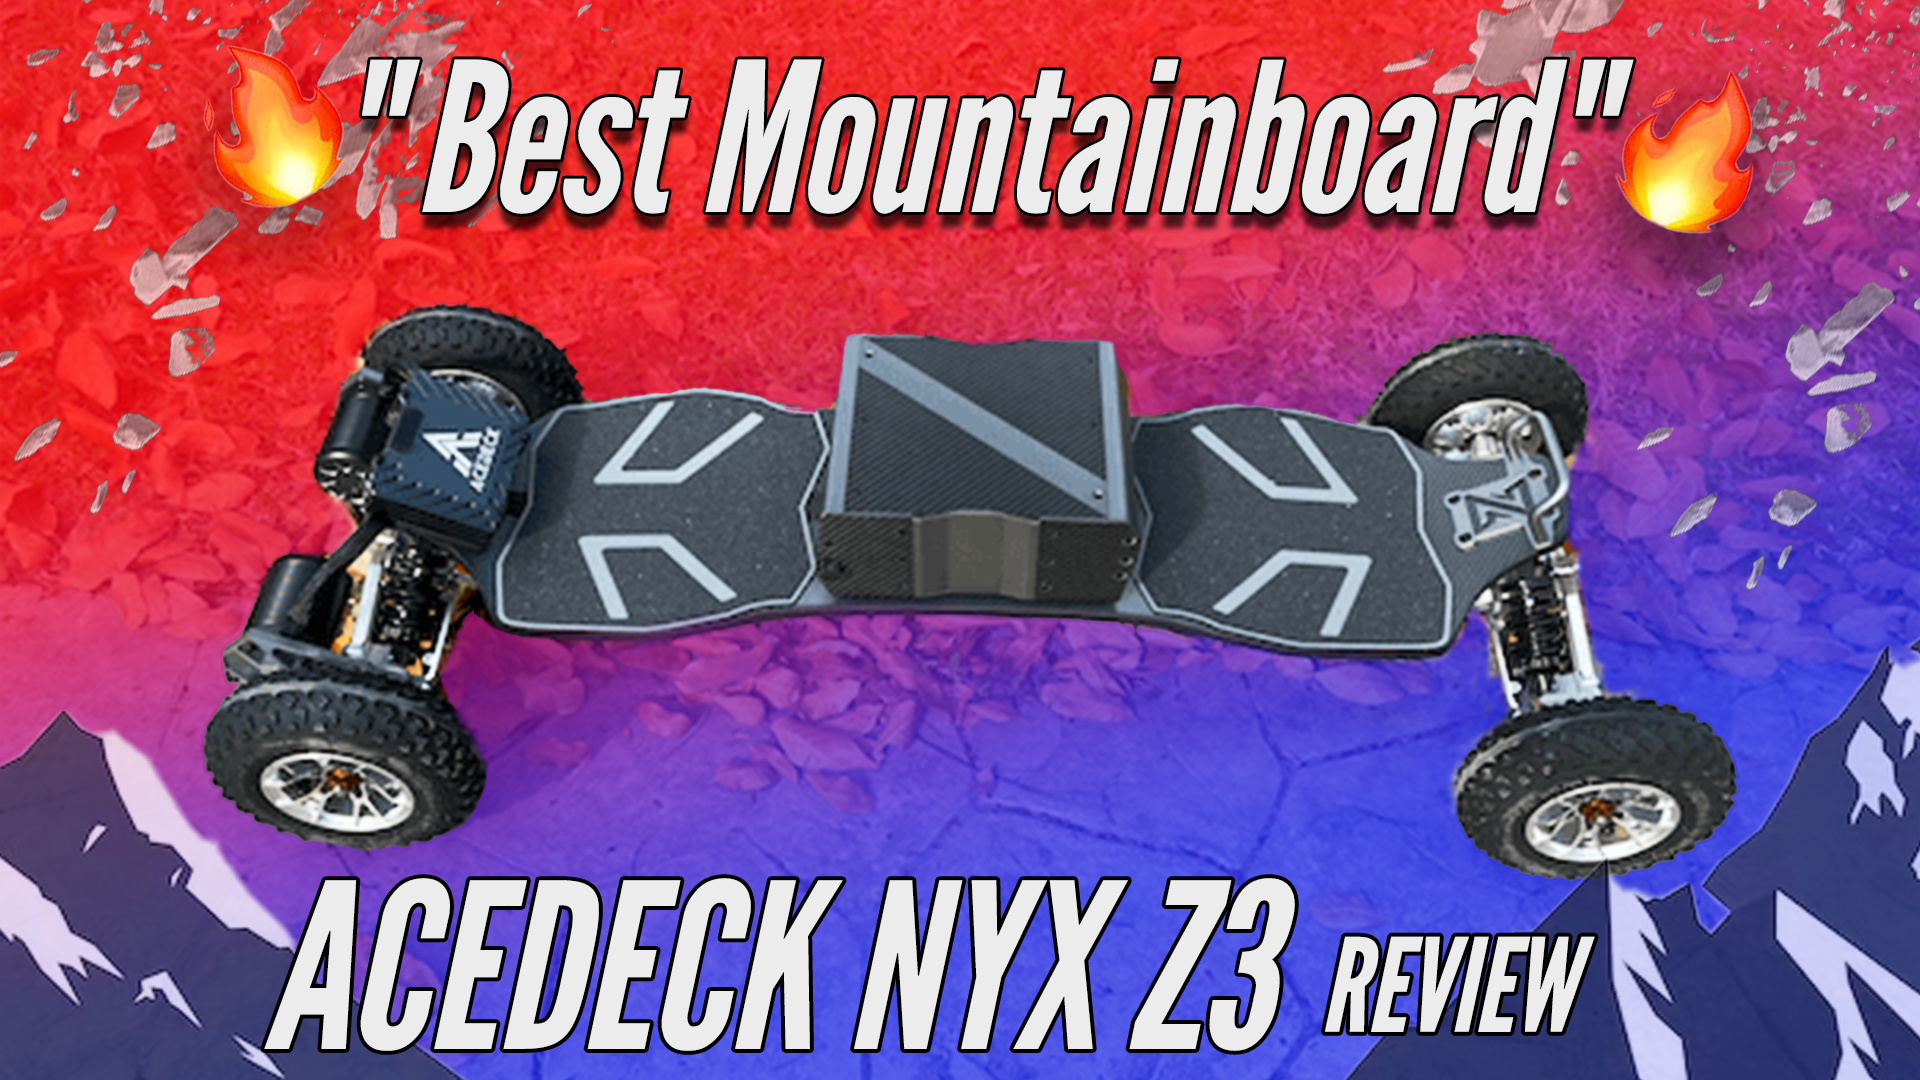 Acedeck Nyx Z3 Review – Best mountainboard!